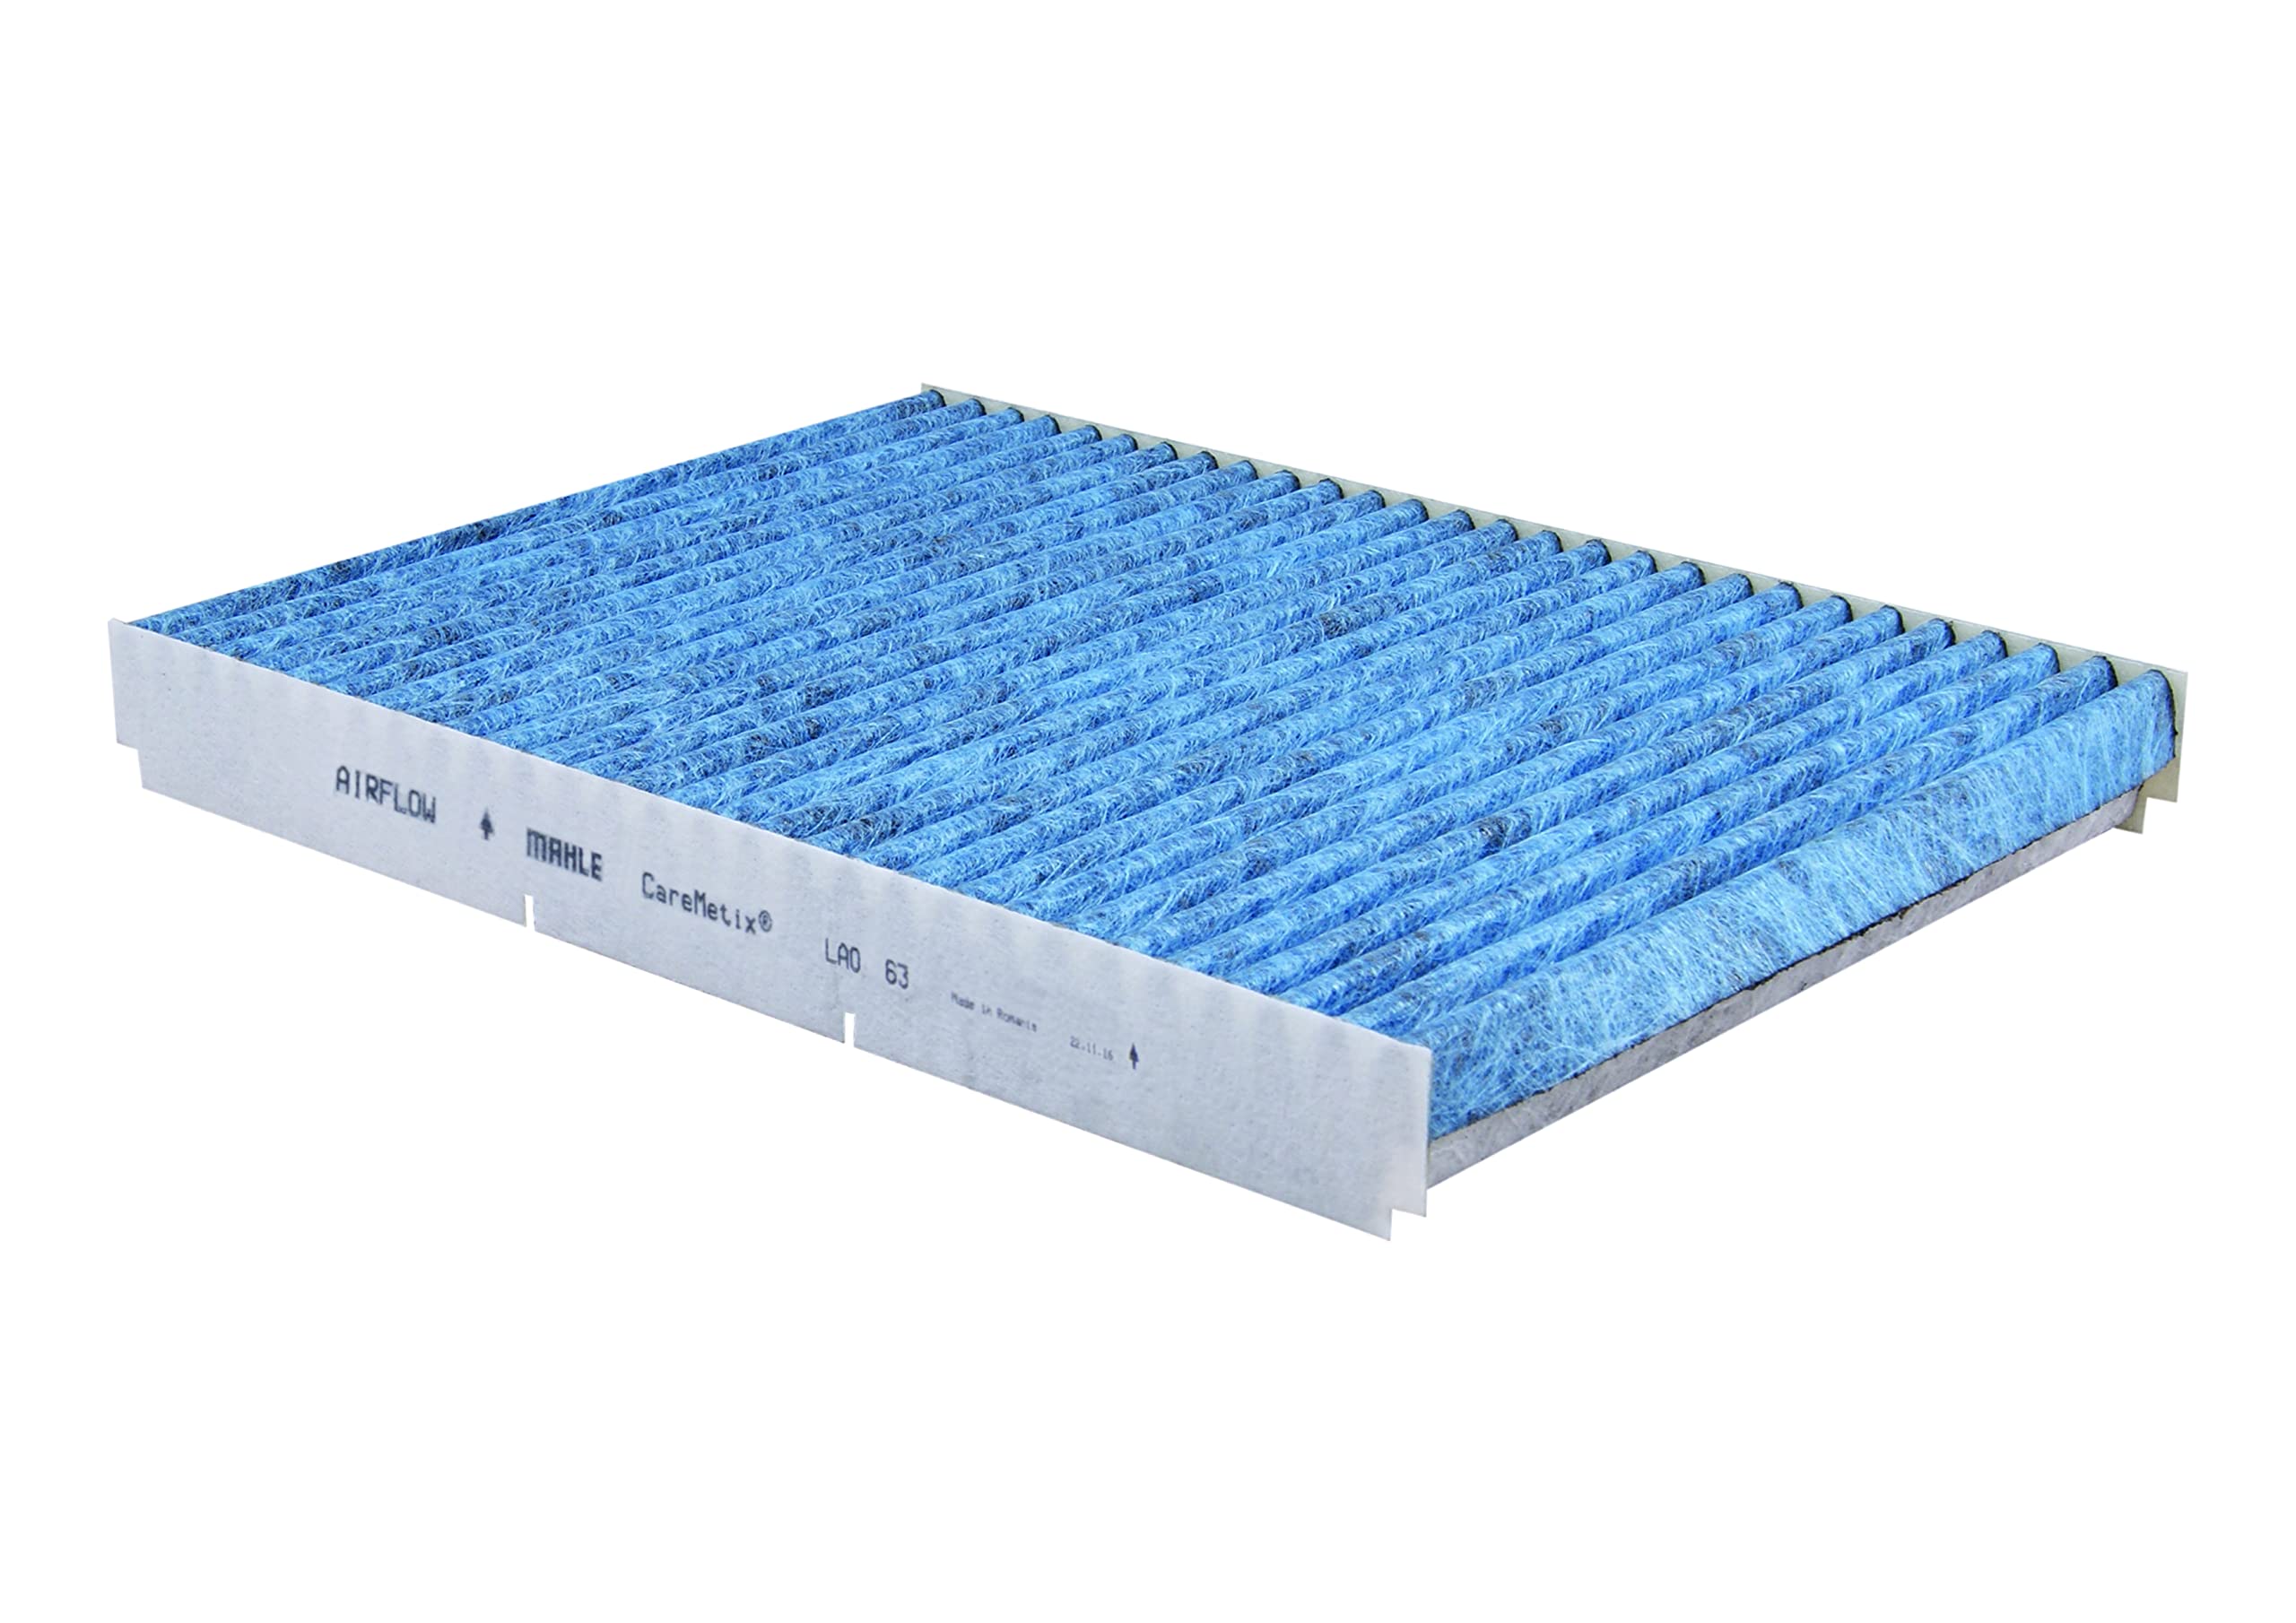 MAHLE Cabin Air Filter LAO 63